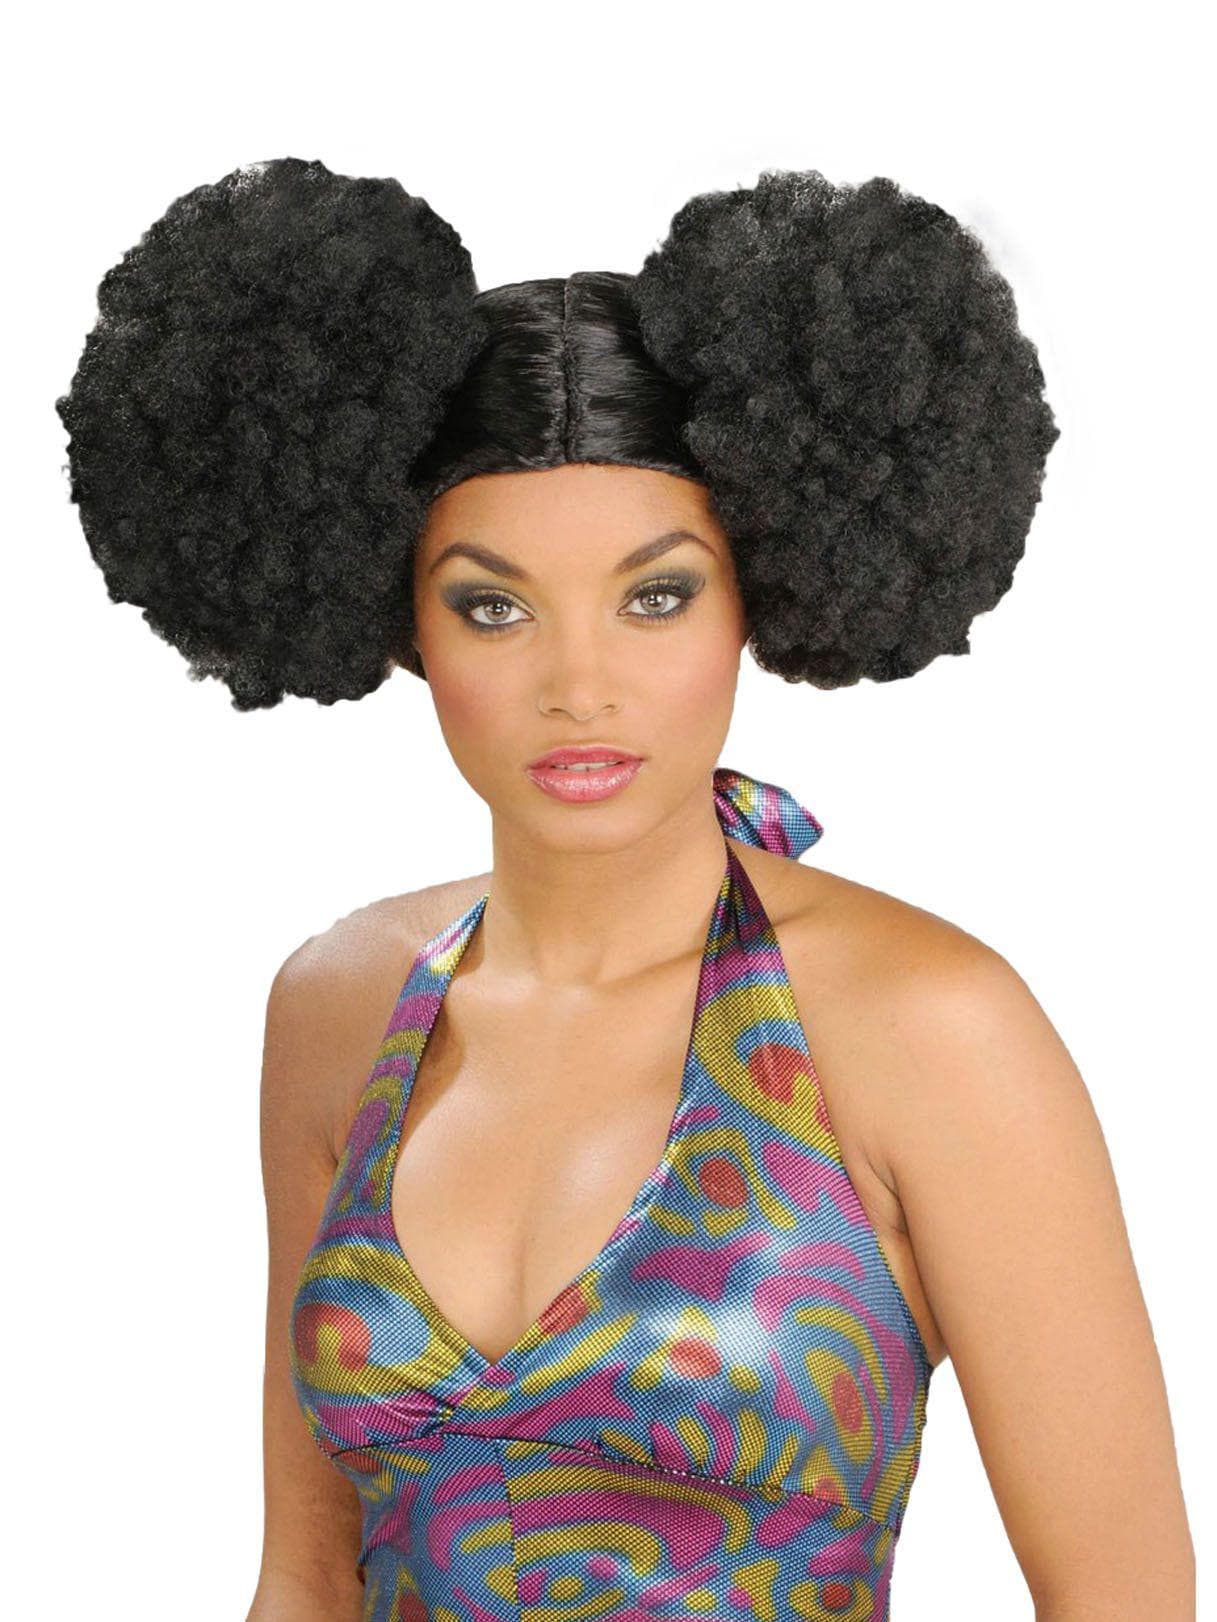 Adult Afro Puffs Wig - costumes.com